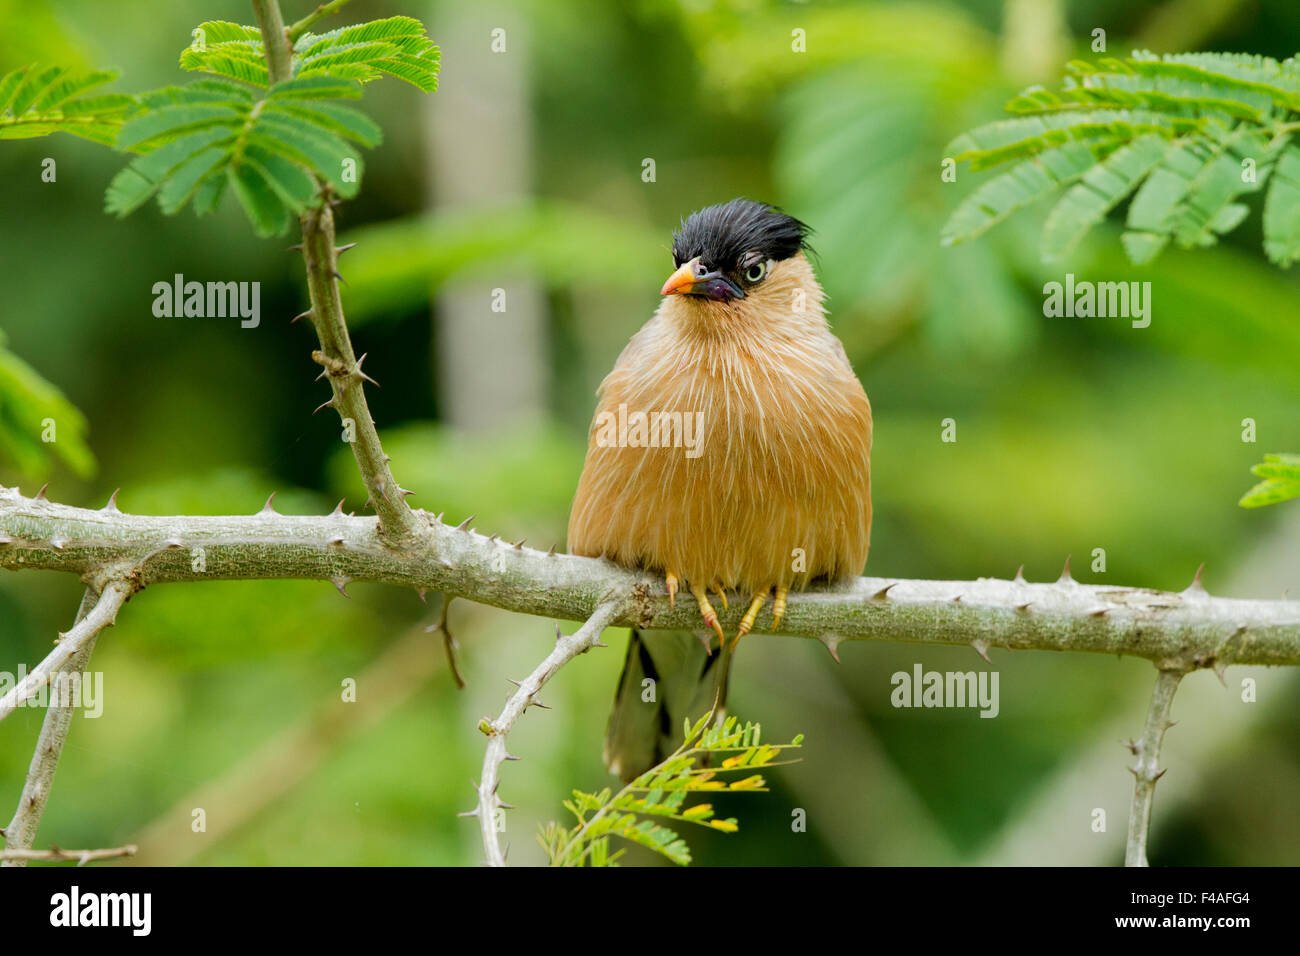 The brahminy myna or brahminy starling (Sturnia pagodarum) is a member of the starling family of birds. Stock Photo